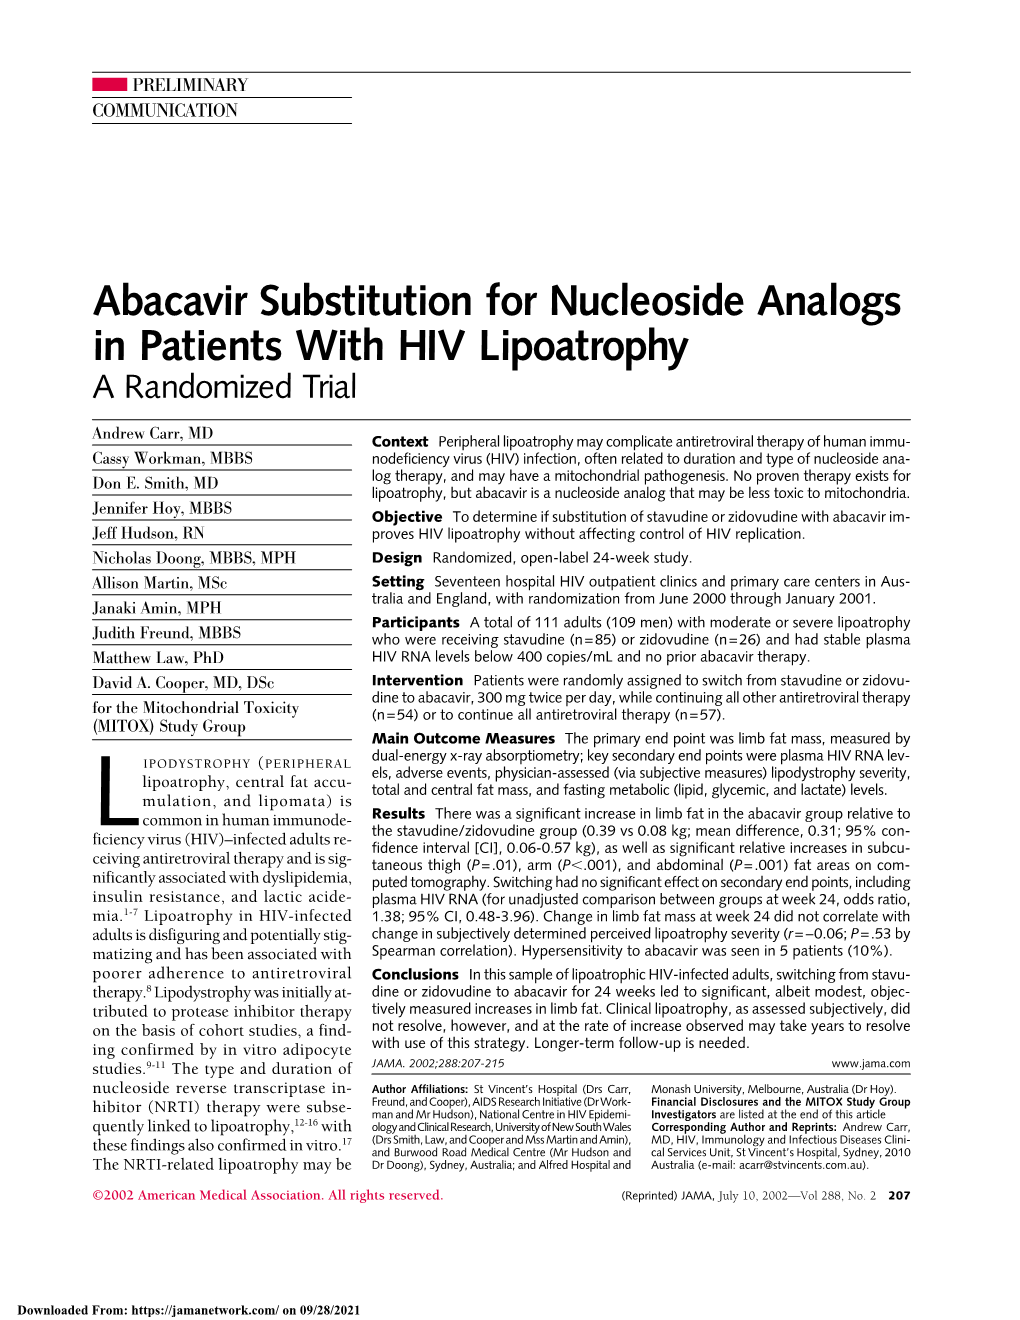 Abacavir Substitution for Nucleoside Analogs in Patients with HIV Lipoatrophy a Randomized Trial